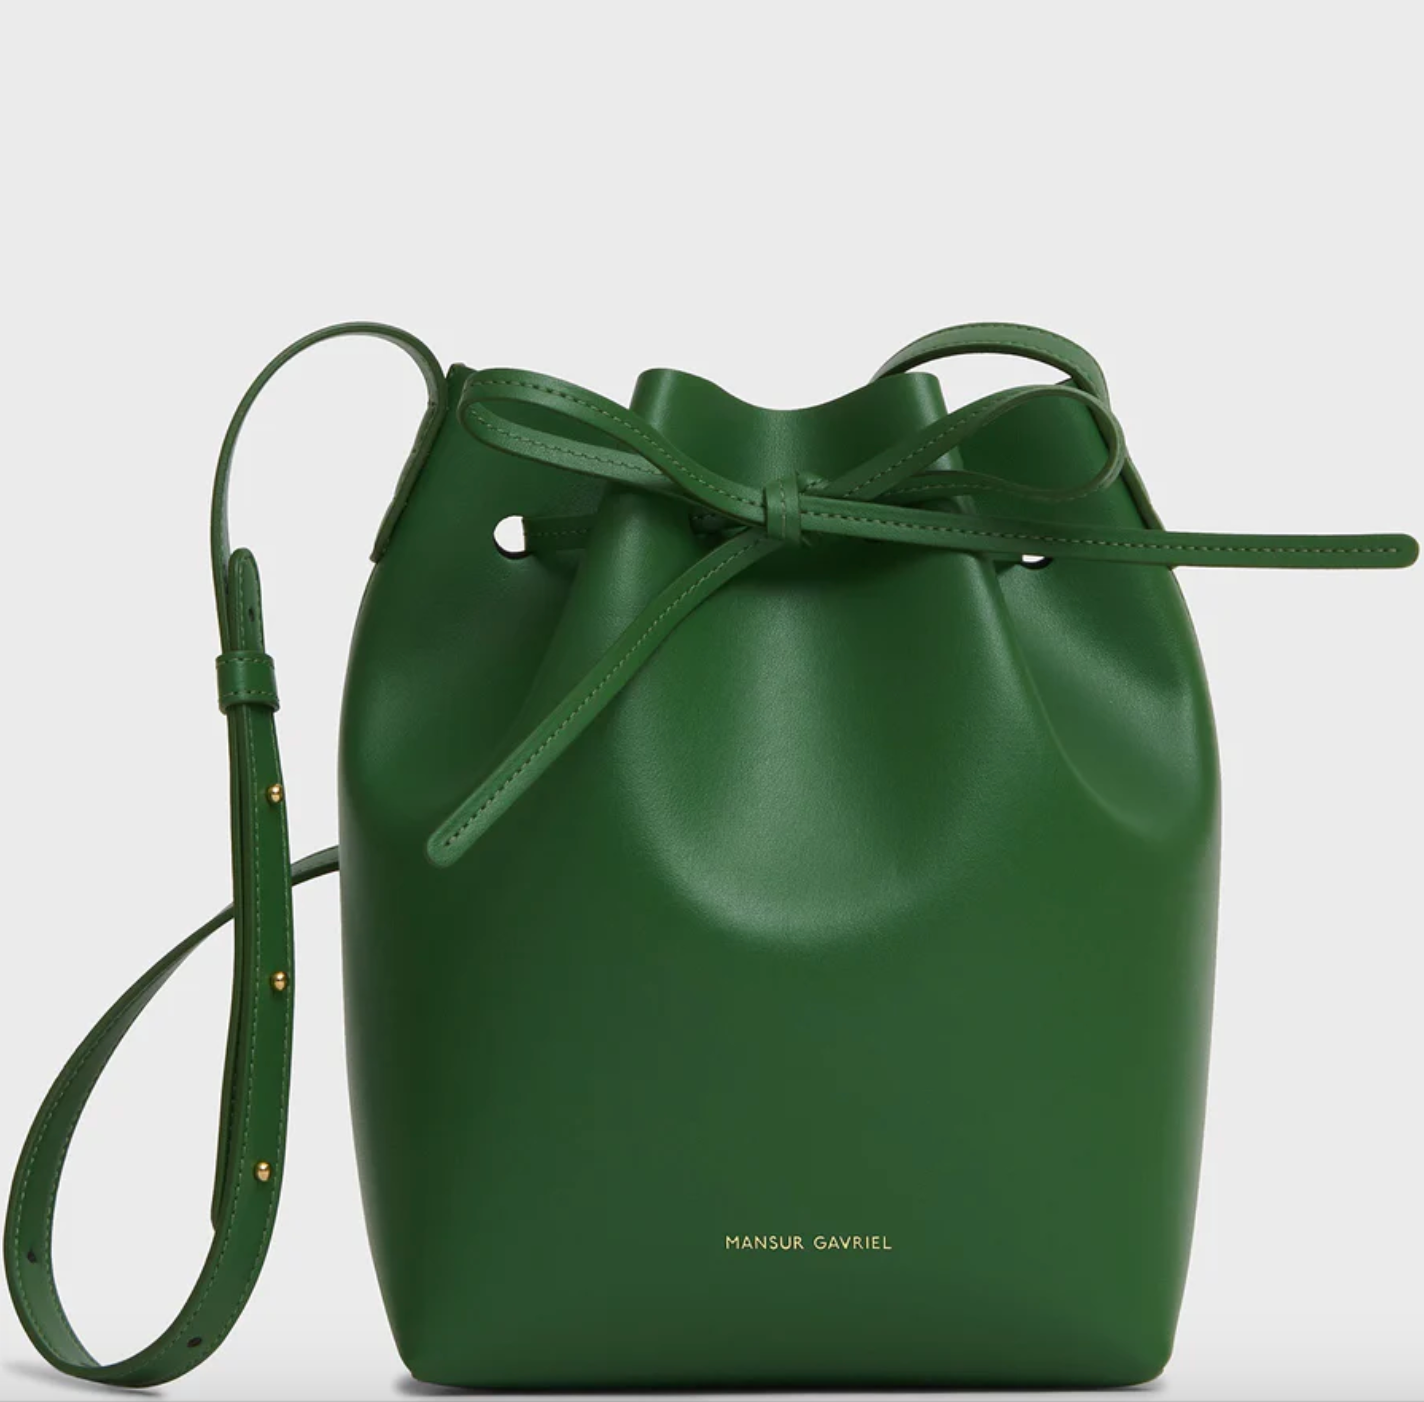 These Italian Leather Bags Are Sustainably-Made and Perfect for City-Hopping